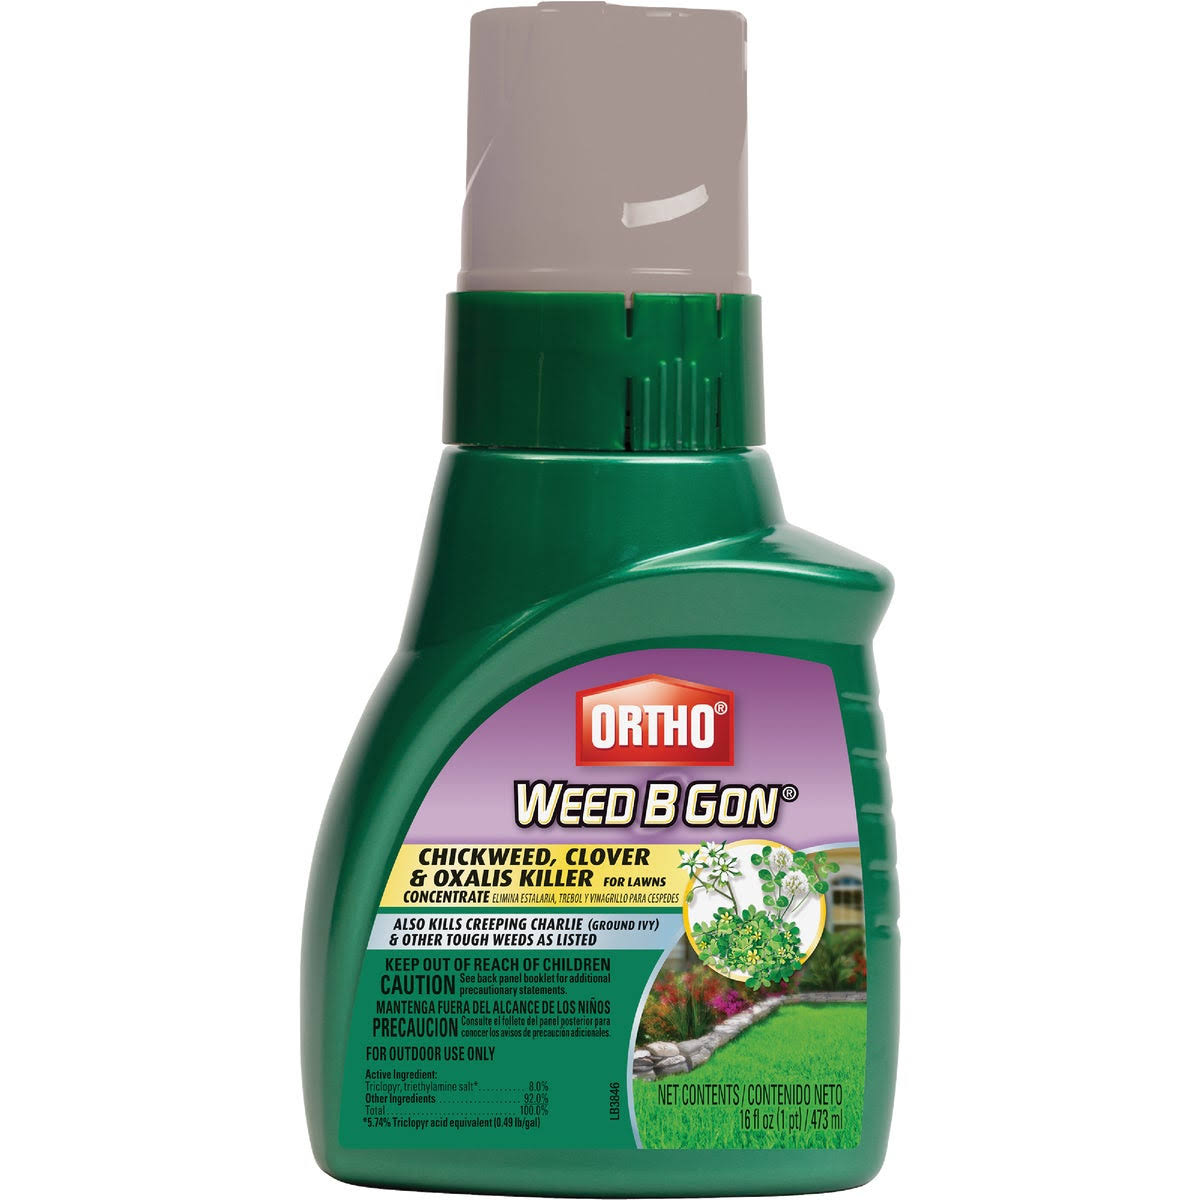 Ortho Weed B Gon Chickweed Clover and Oxalis Killer for Lawn Concentrate - 16oz